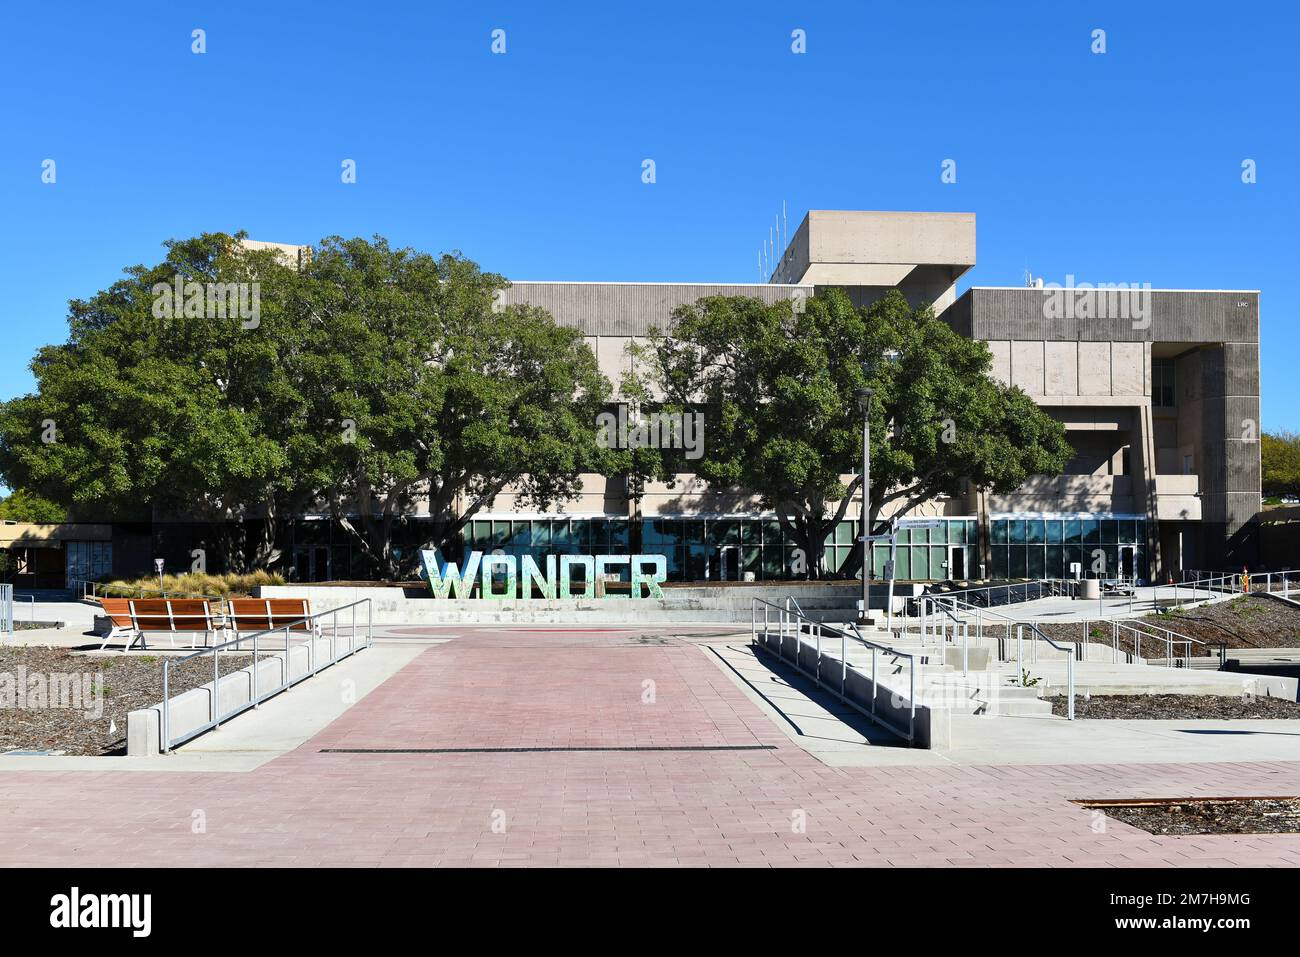 MISSION VIEJO, CALIFORNIA - 8 JAN 2023: Amphitheater with the Wonder Sculpture and Library on the campus of Saddleback College. Stock Photo